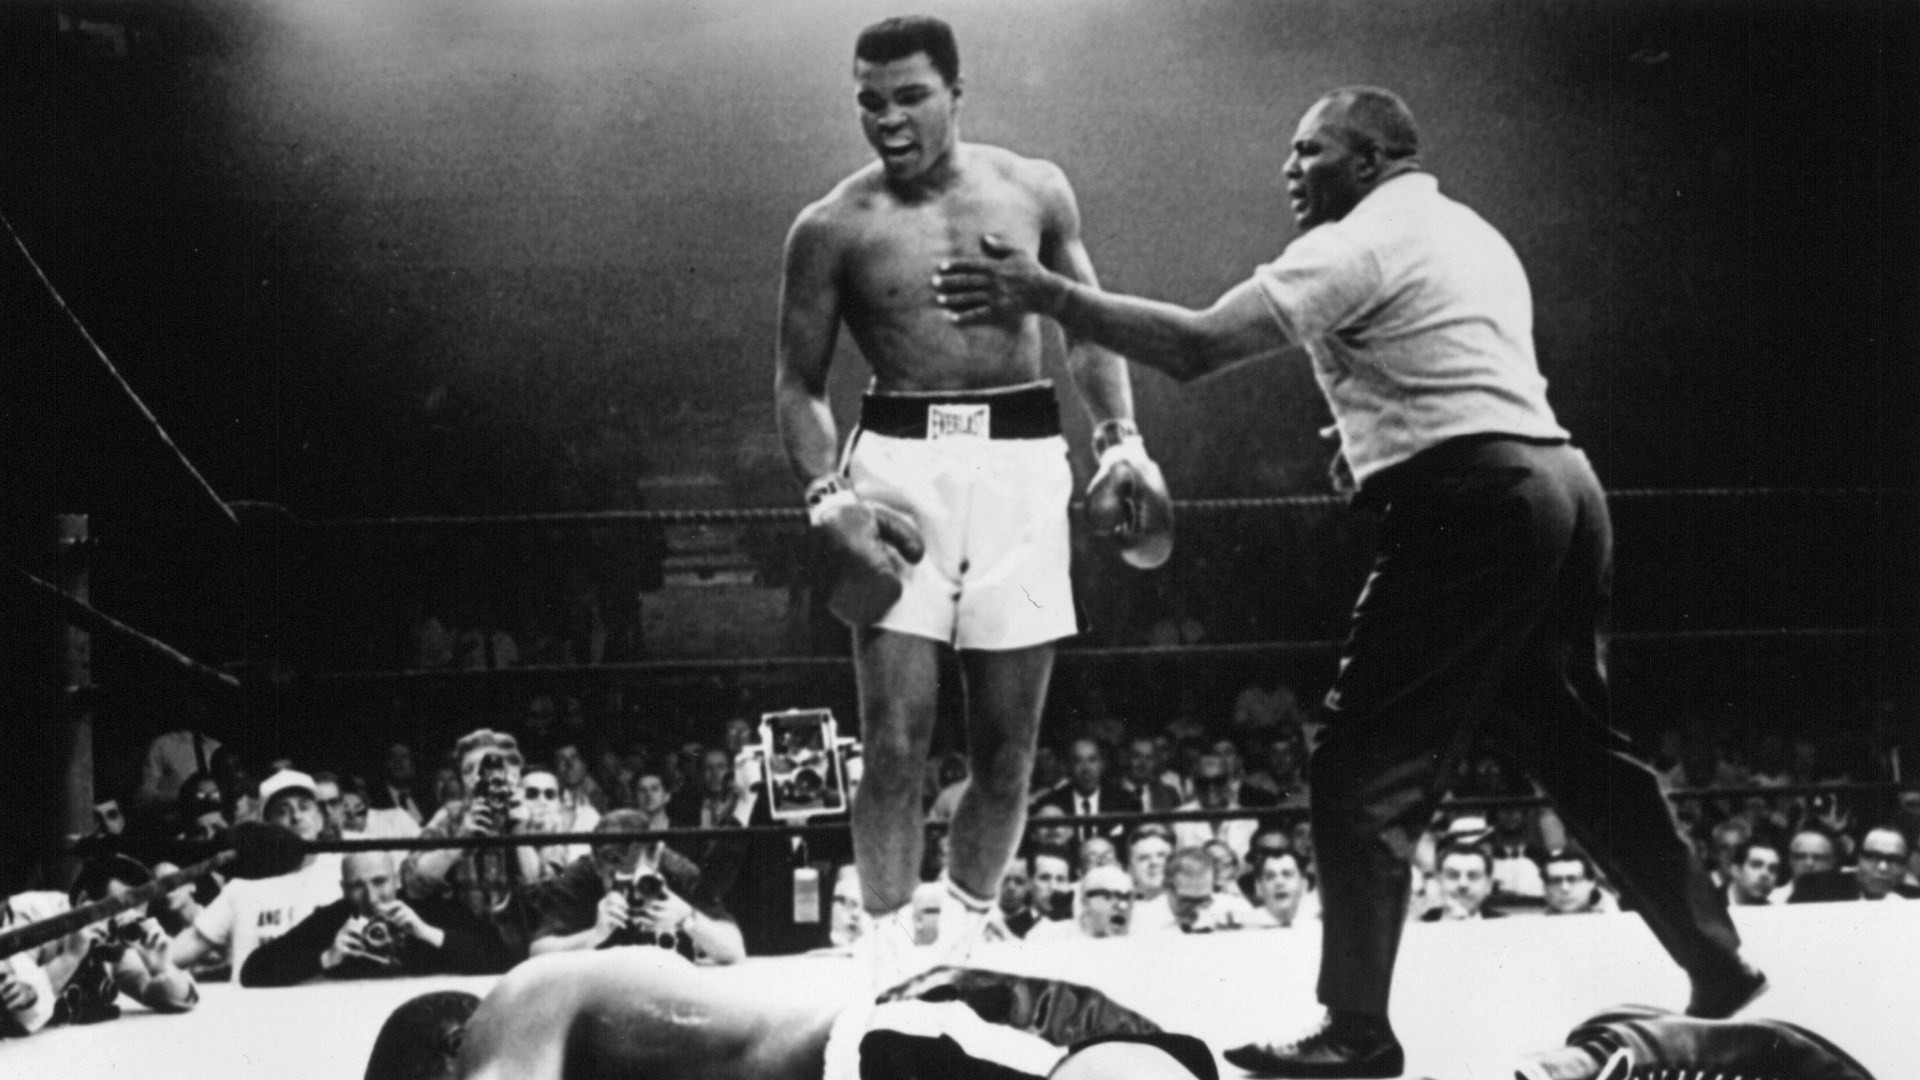 1920x1080 Monday Motivation: 10 Muhammad Ali Quotes That Prove He Was A Total Bad Ass  - Mindless